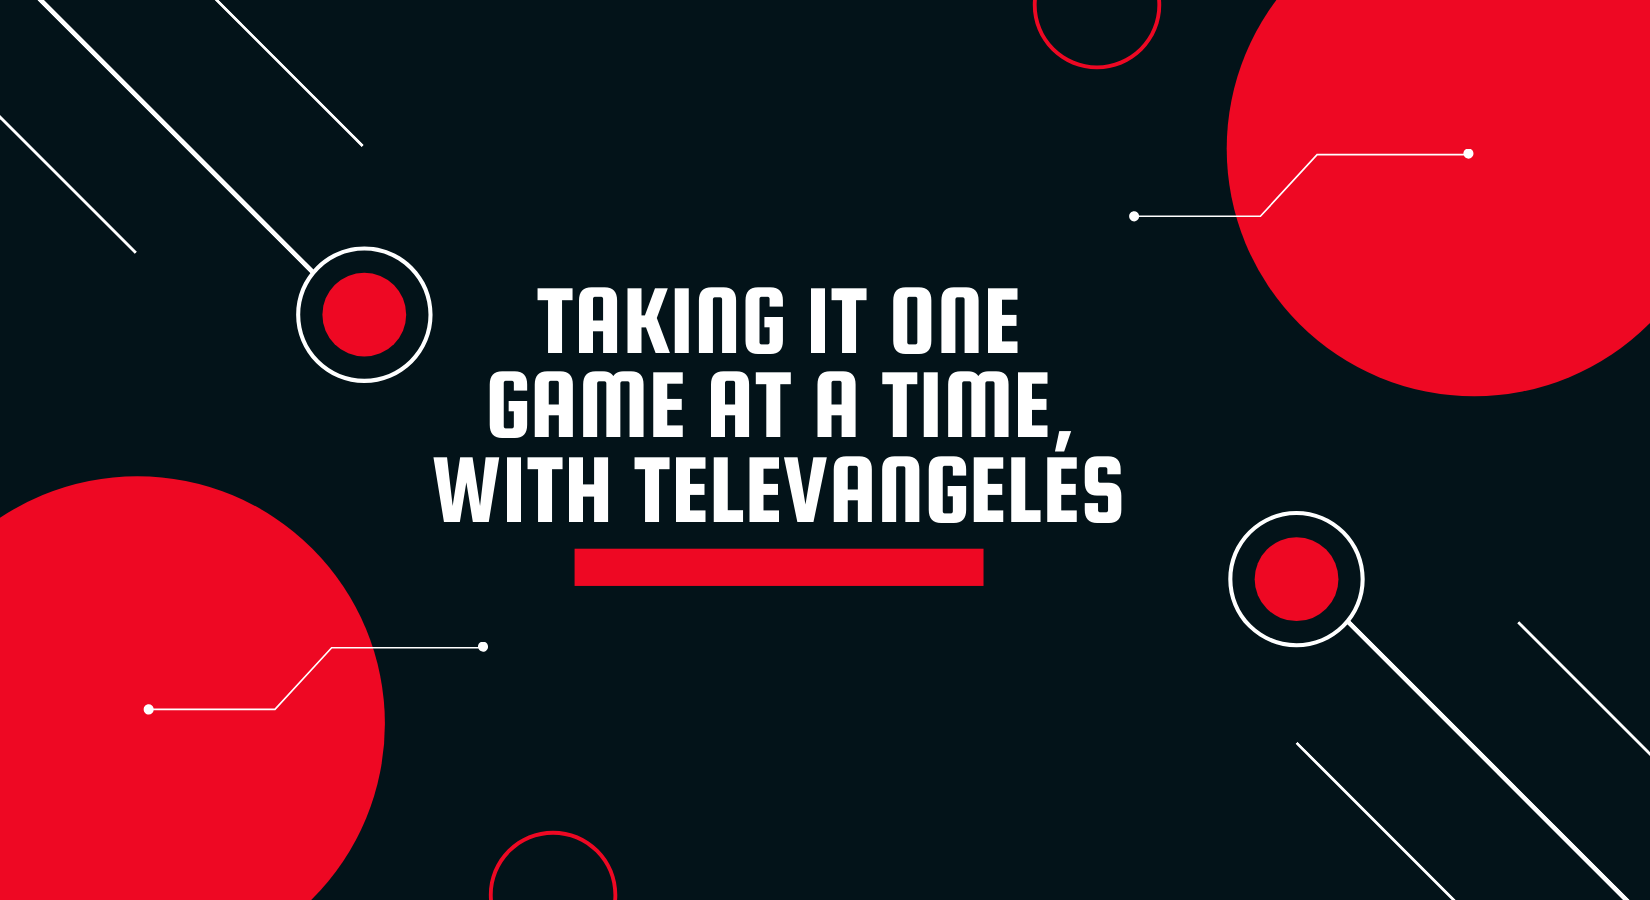 Taking it one game at a time with televangeles